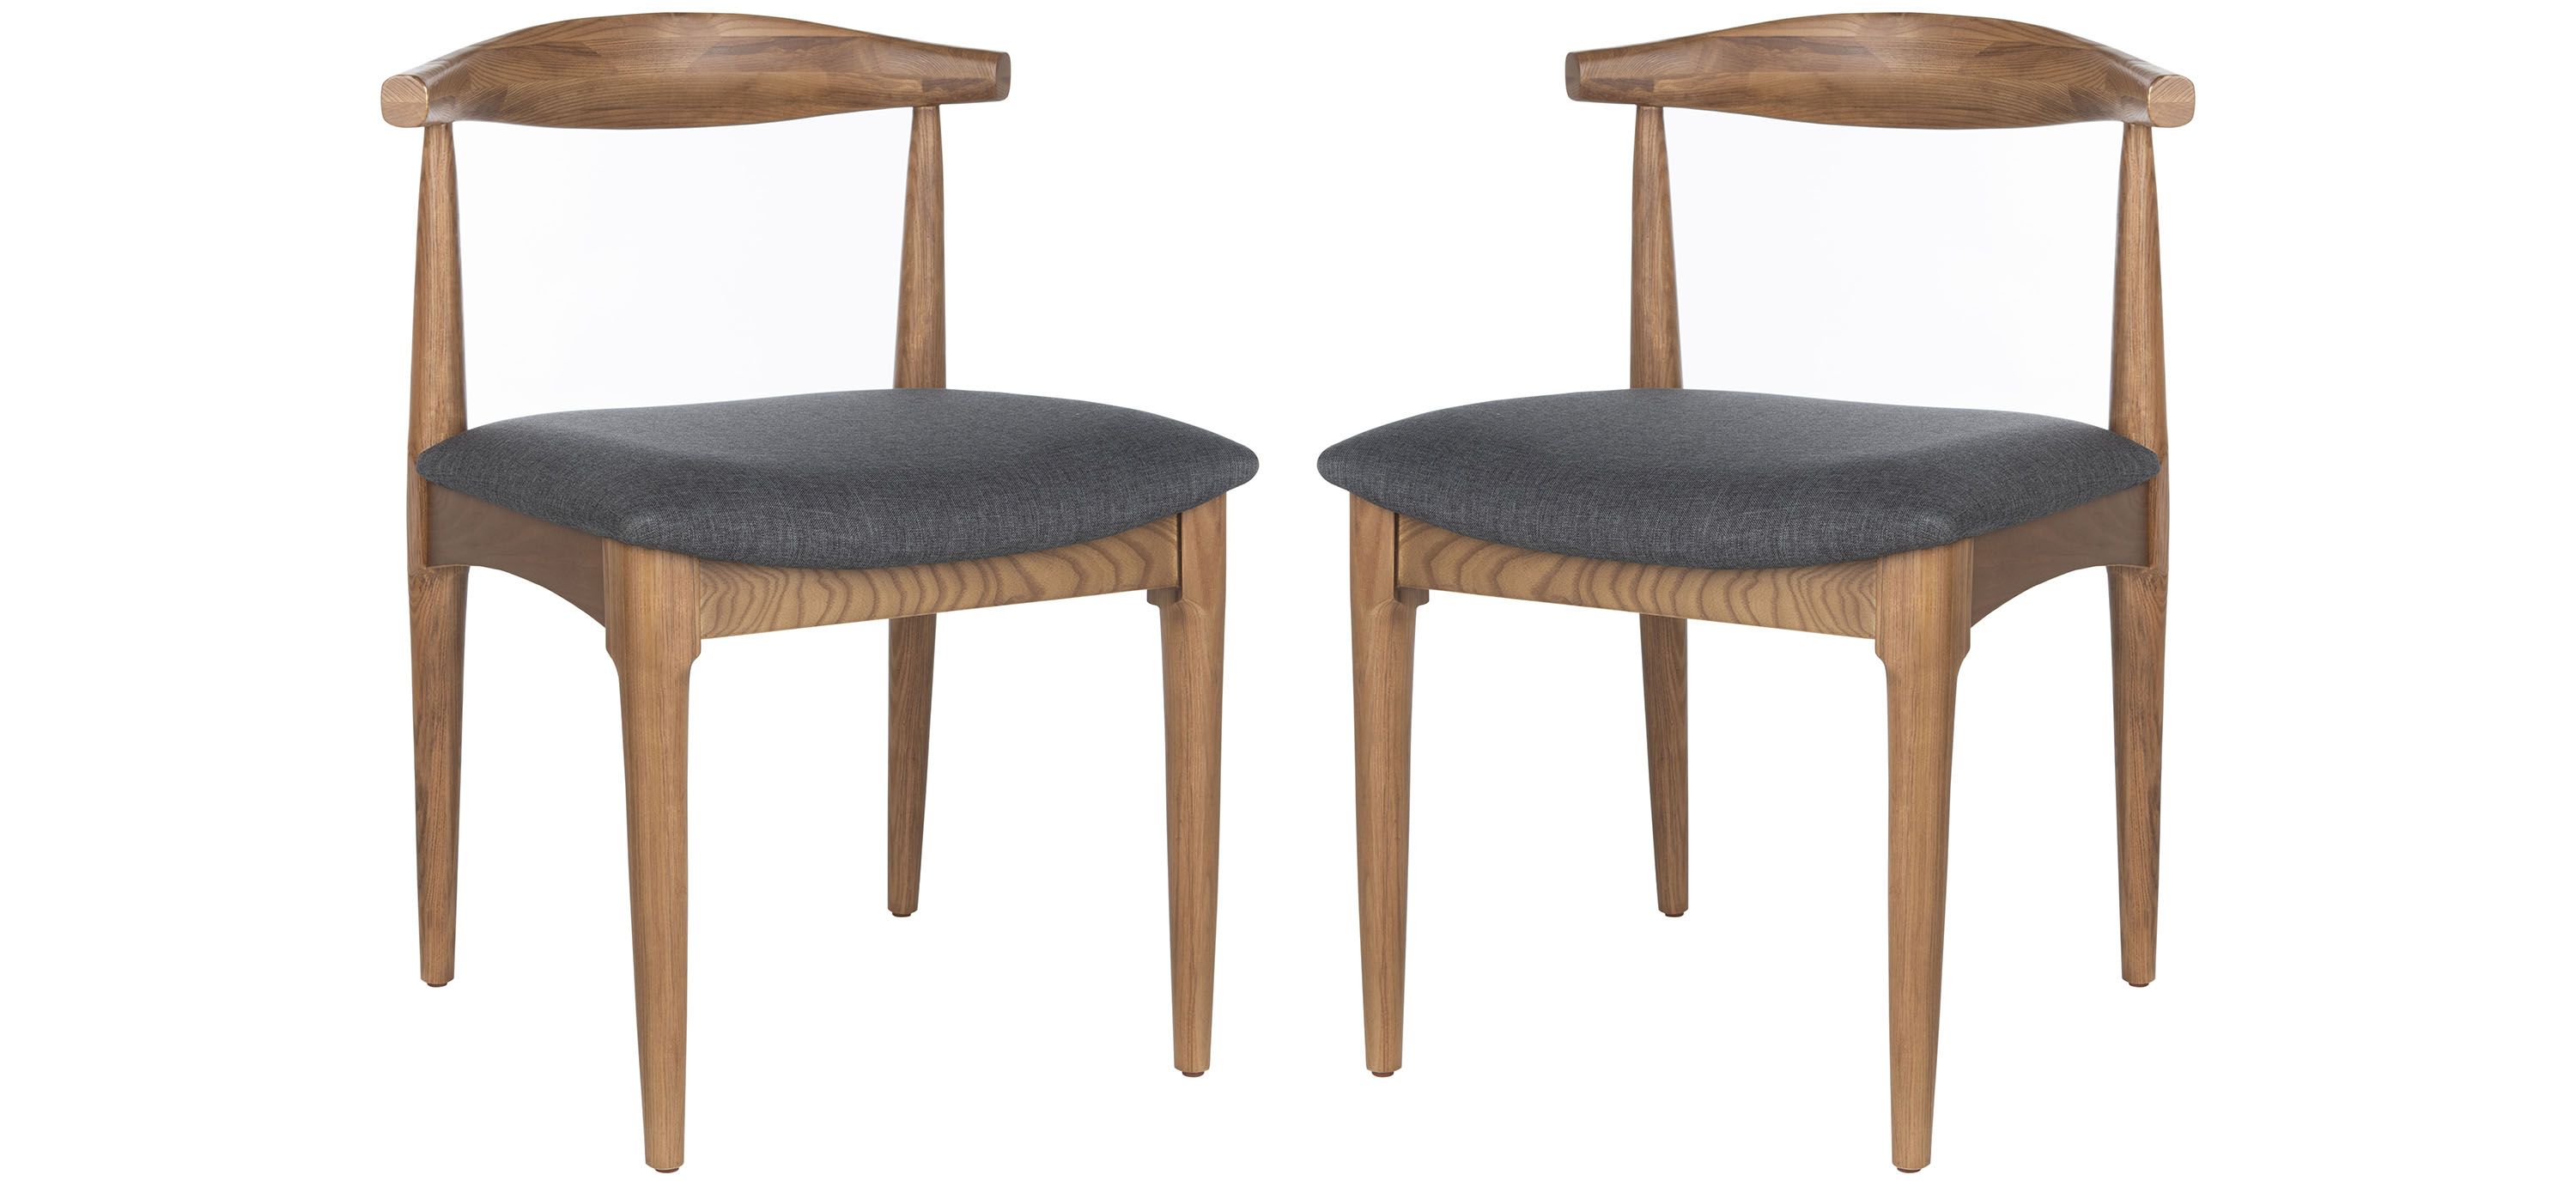 Benny Dining Chair - Set of 2